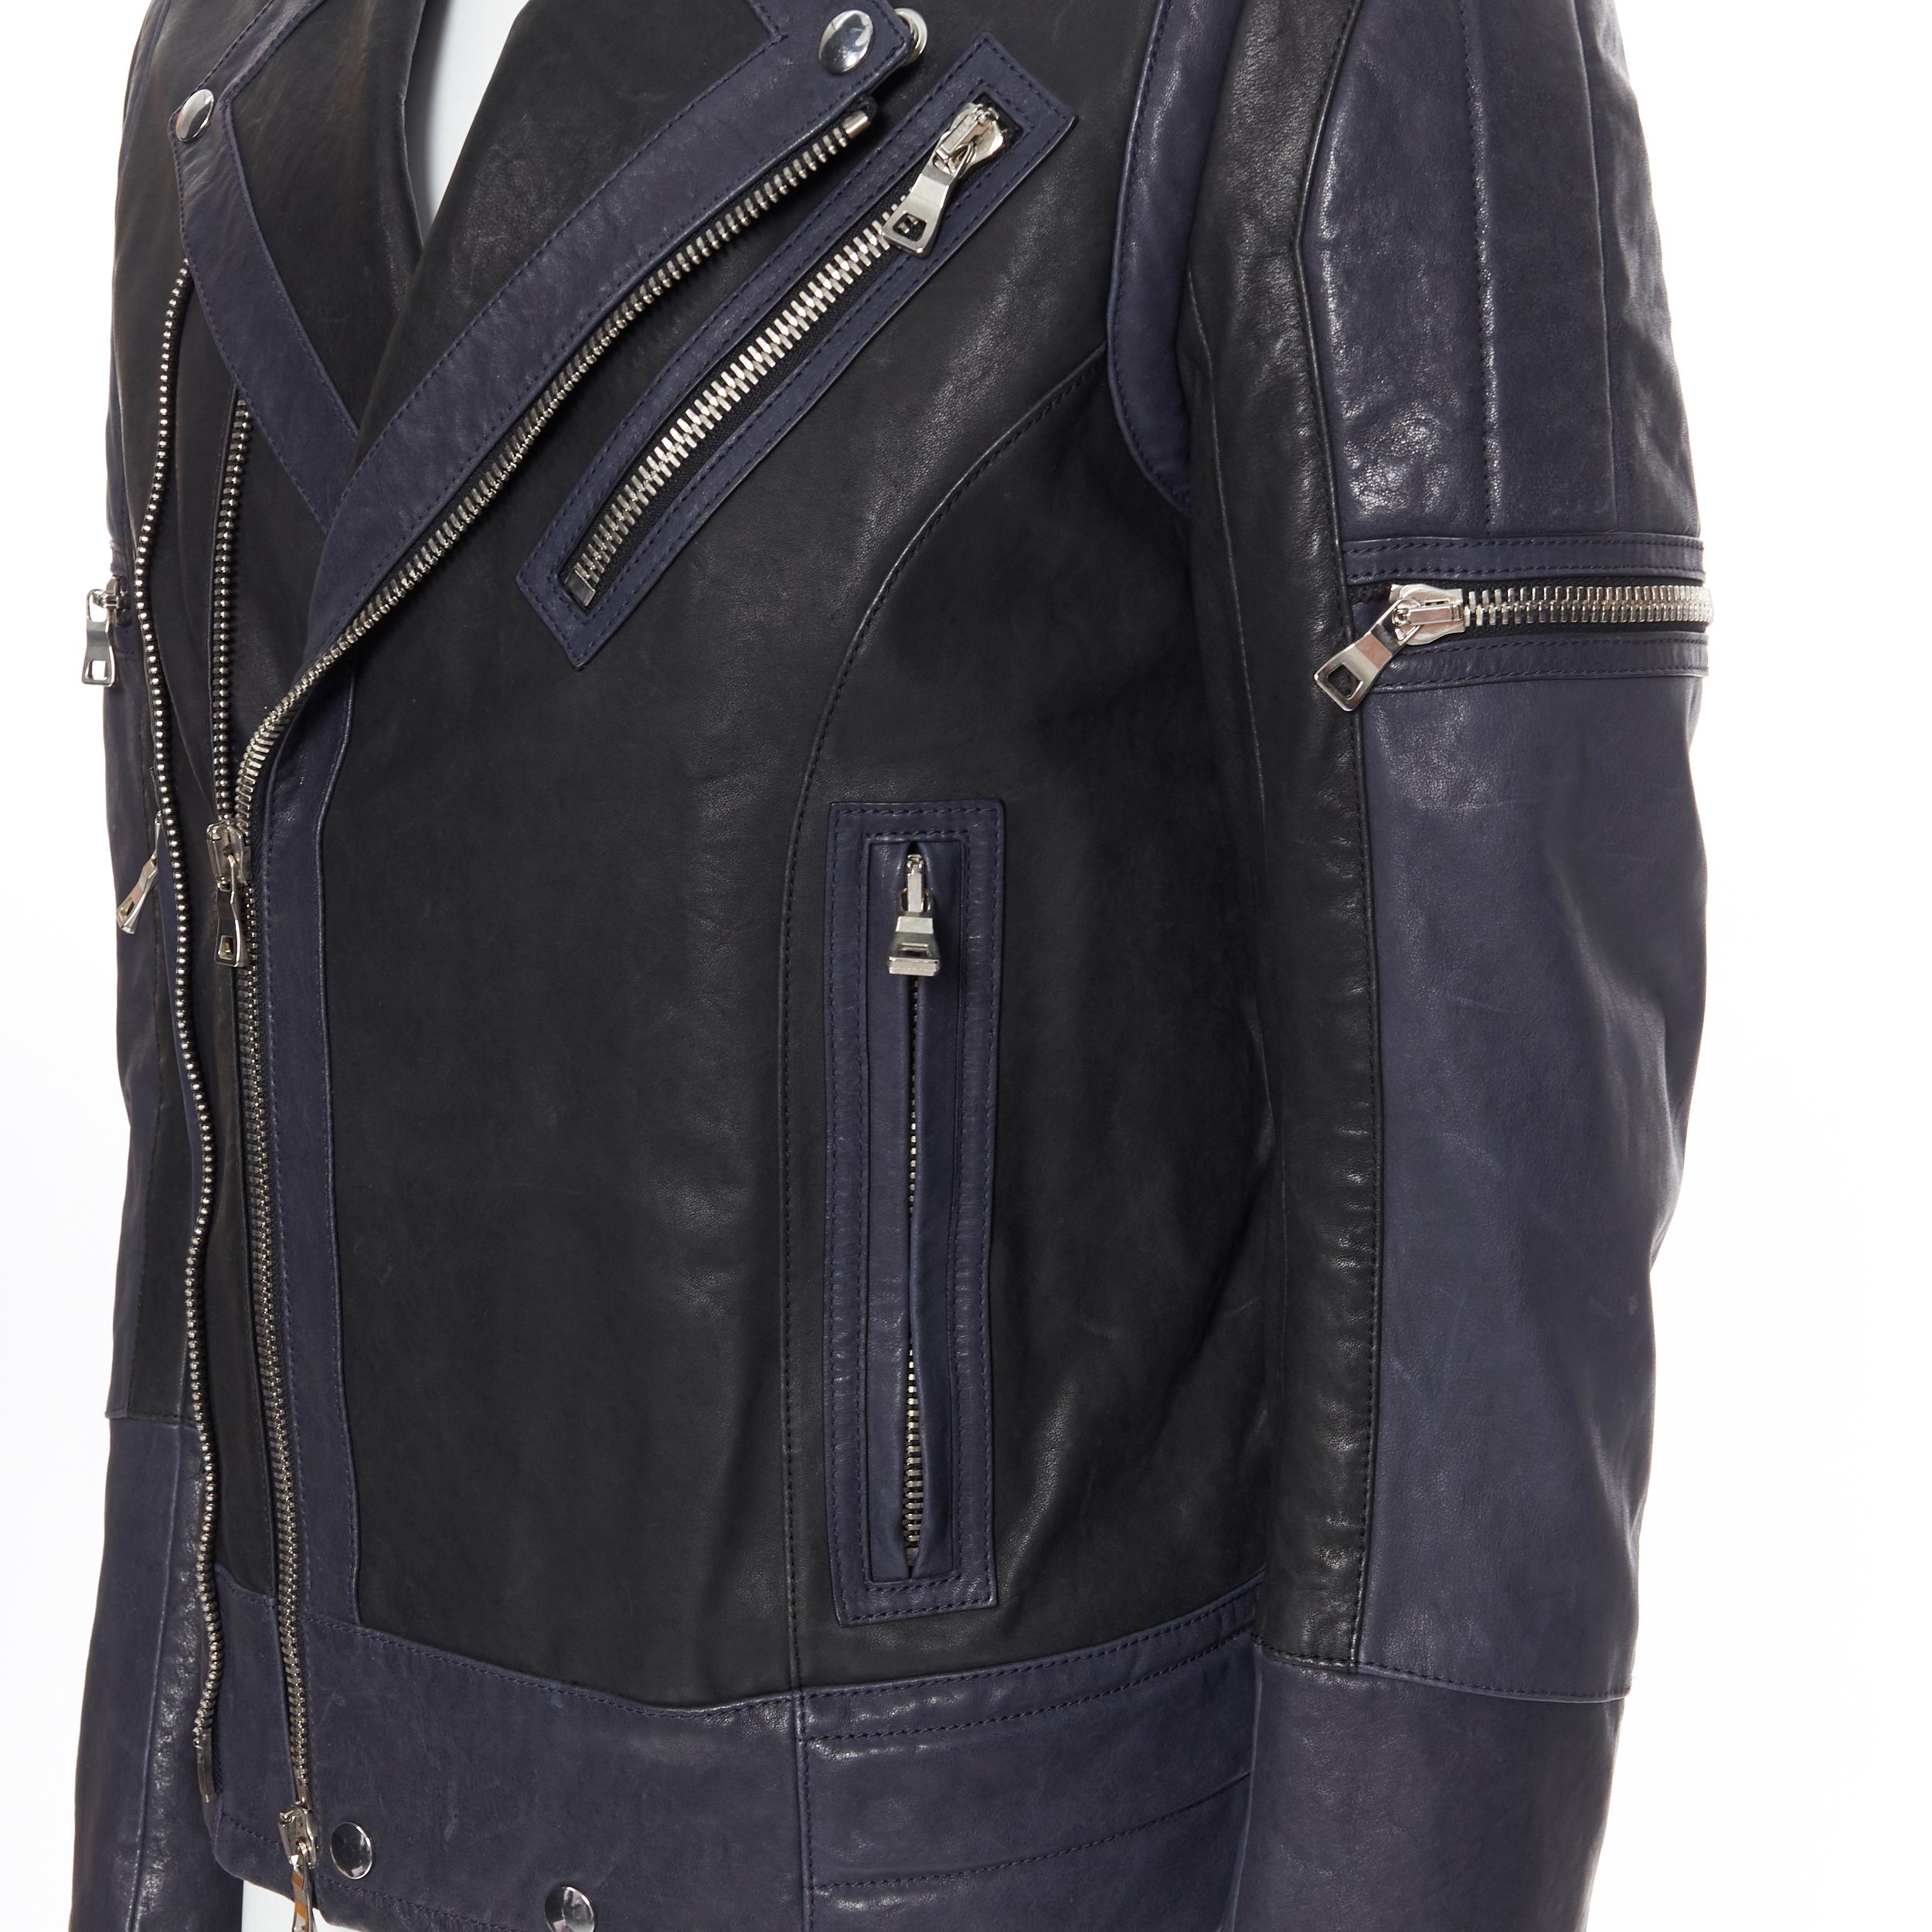 new BALMAIN navy blue black leather ribbed motorcycle biker jacket EU48 M 
Reference: TGAS/A05412 
Brand: Balmain 
Designer: Olivier Rousteing 
Material: Leather 
Color: Black 
Pattern: Solid 
Closure: Zip 
Extra Detail: BALMAIN style code: